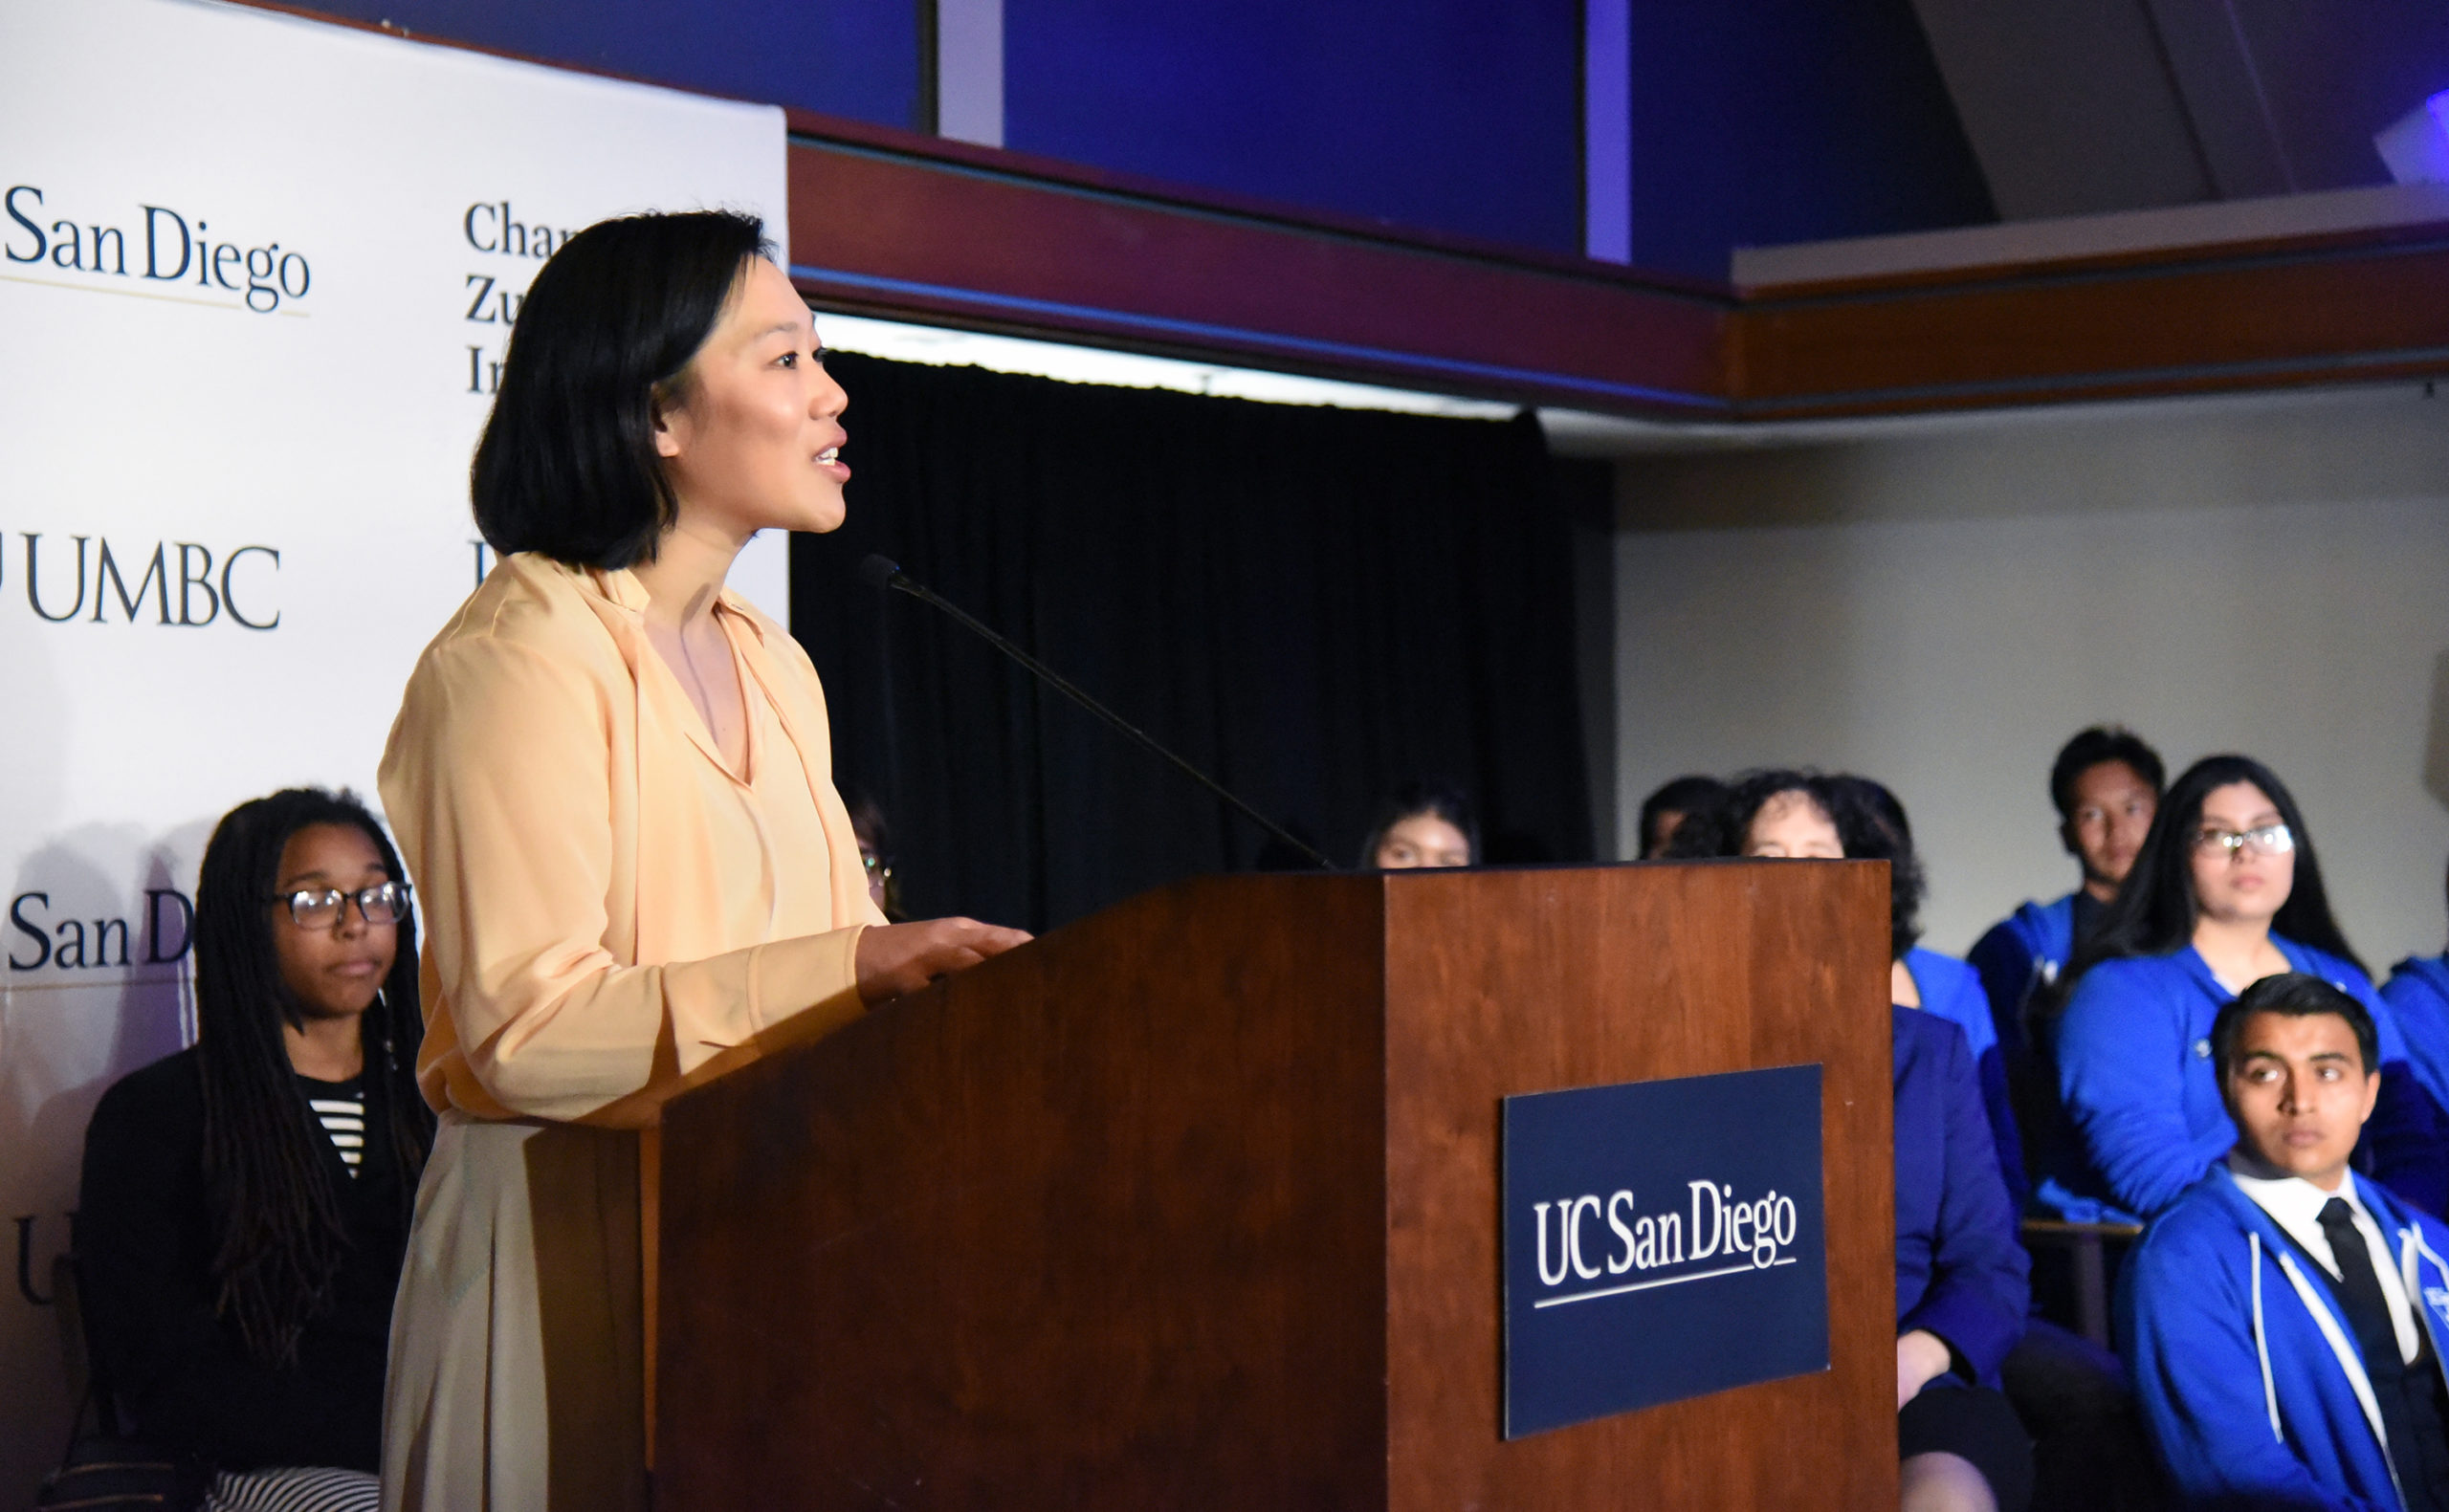 In this handout released by The Chan Zuckerberg Initiative (CZI), Priscilla Chan meets with undergraduate scholars in science, technology, engineering, and math (STEM) fields at University California San Diego, April 9, 2019 in La Jolla, California. CZI announced today that it has awarded $6.9 million to support a unique partnership to encourage underrepresented students to pursue careers in science, technology, mathematics, and engineering (STEM fields) at both UC San Diego and UC Berkeley. (Photo by CZI/Bob Riha Jr.)